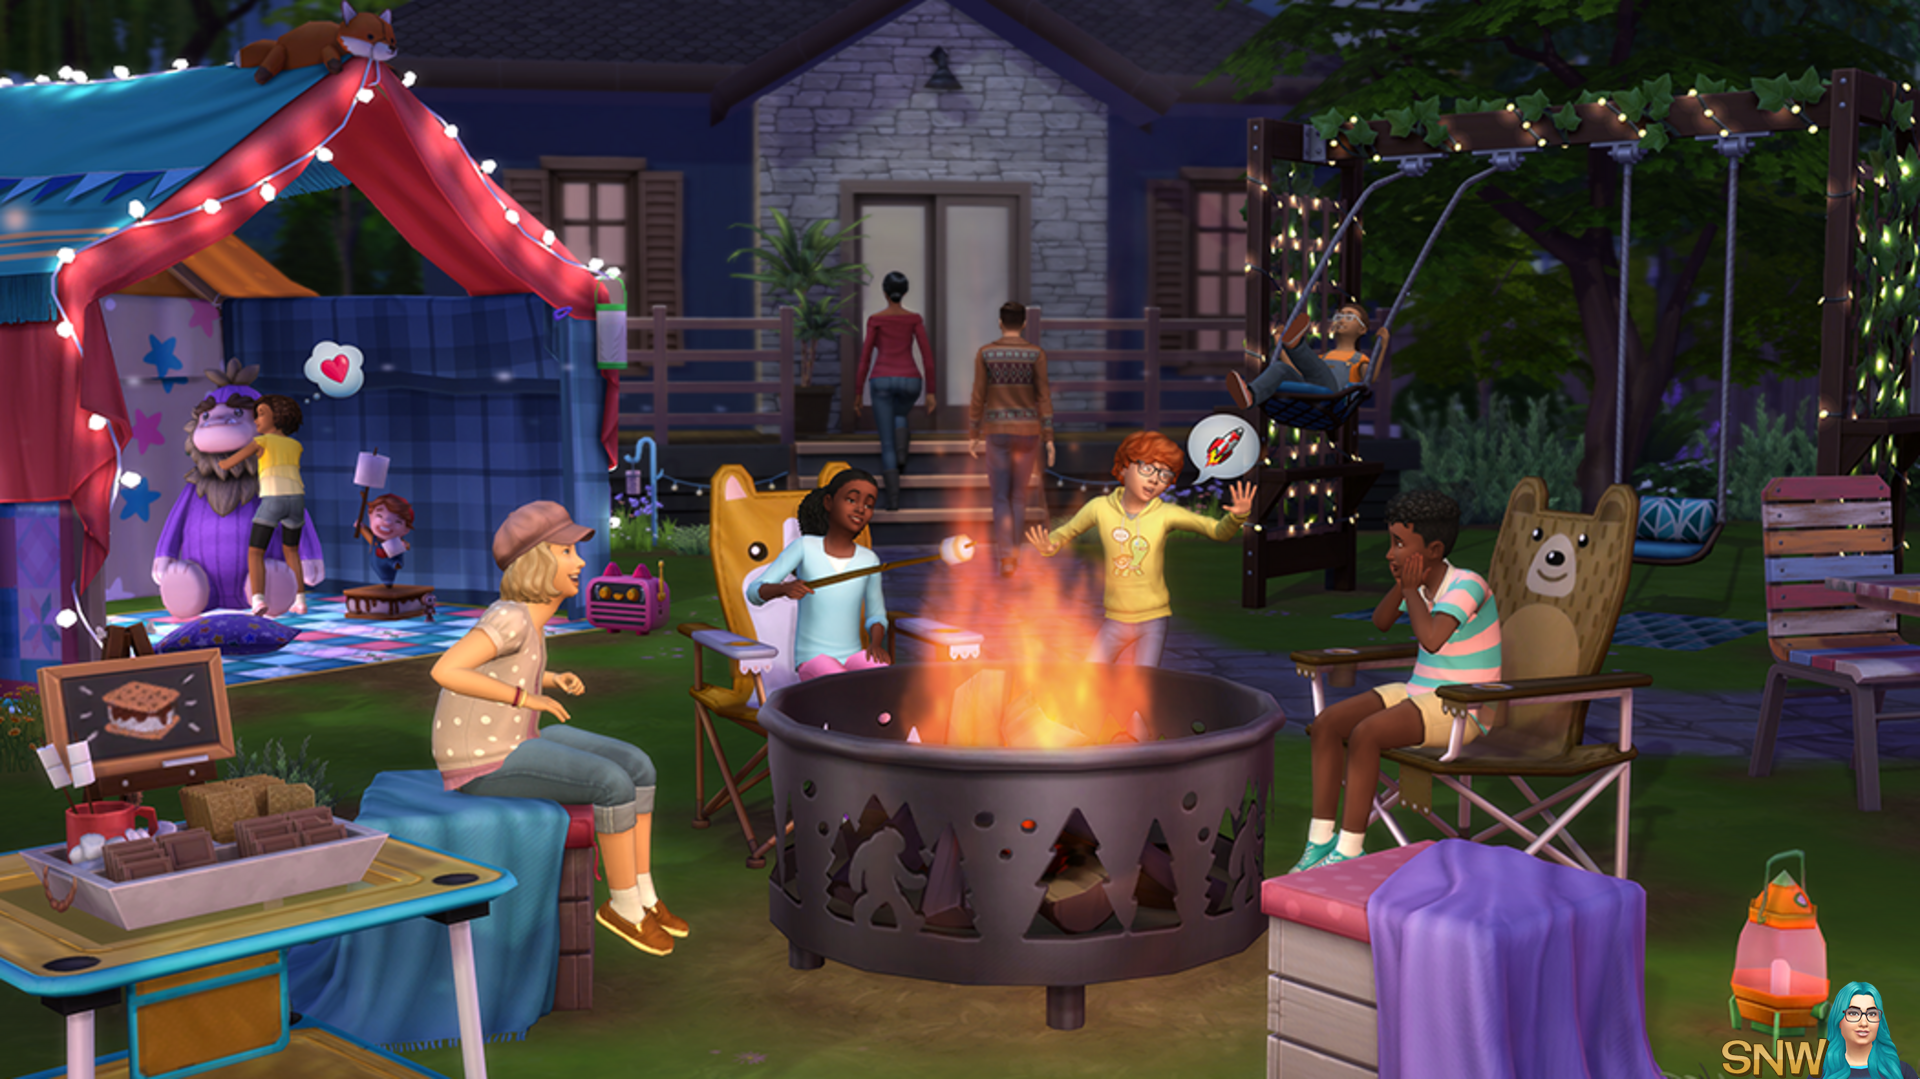 The Sims 4: Little Campers Kit Screenshots